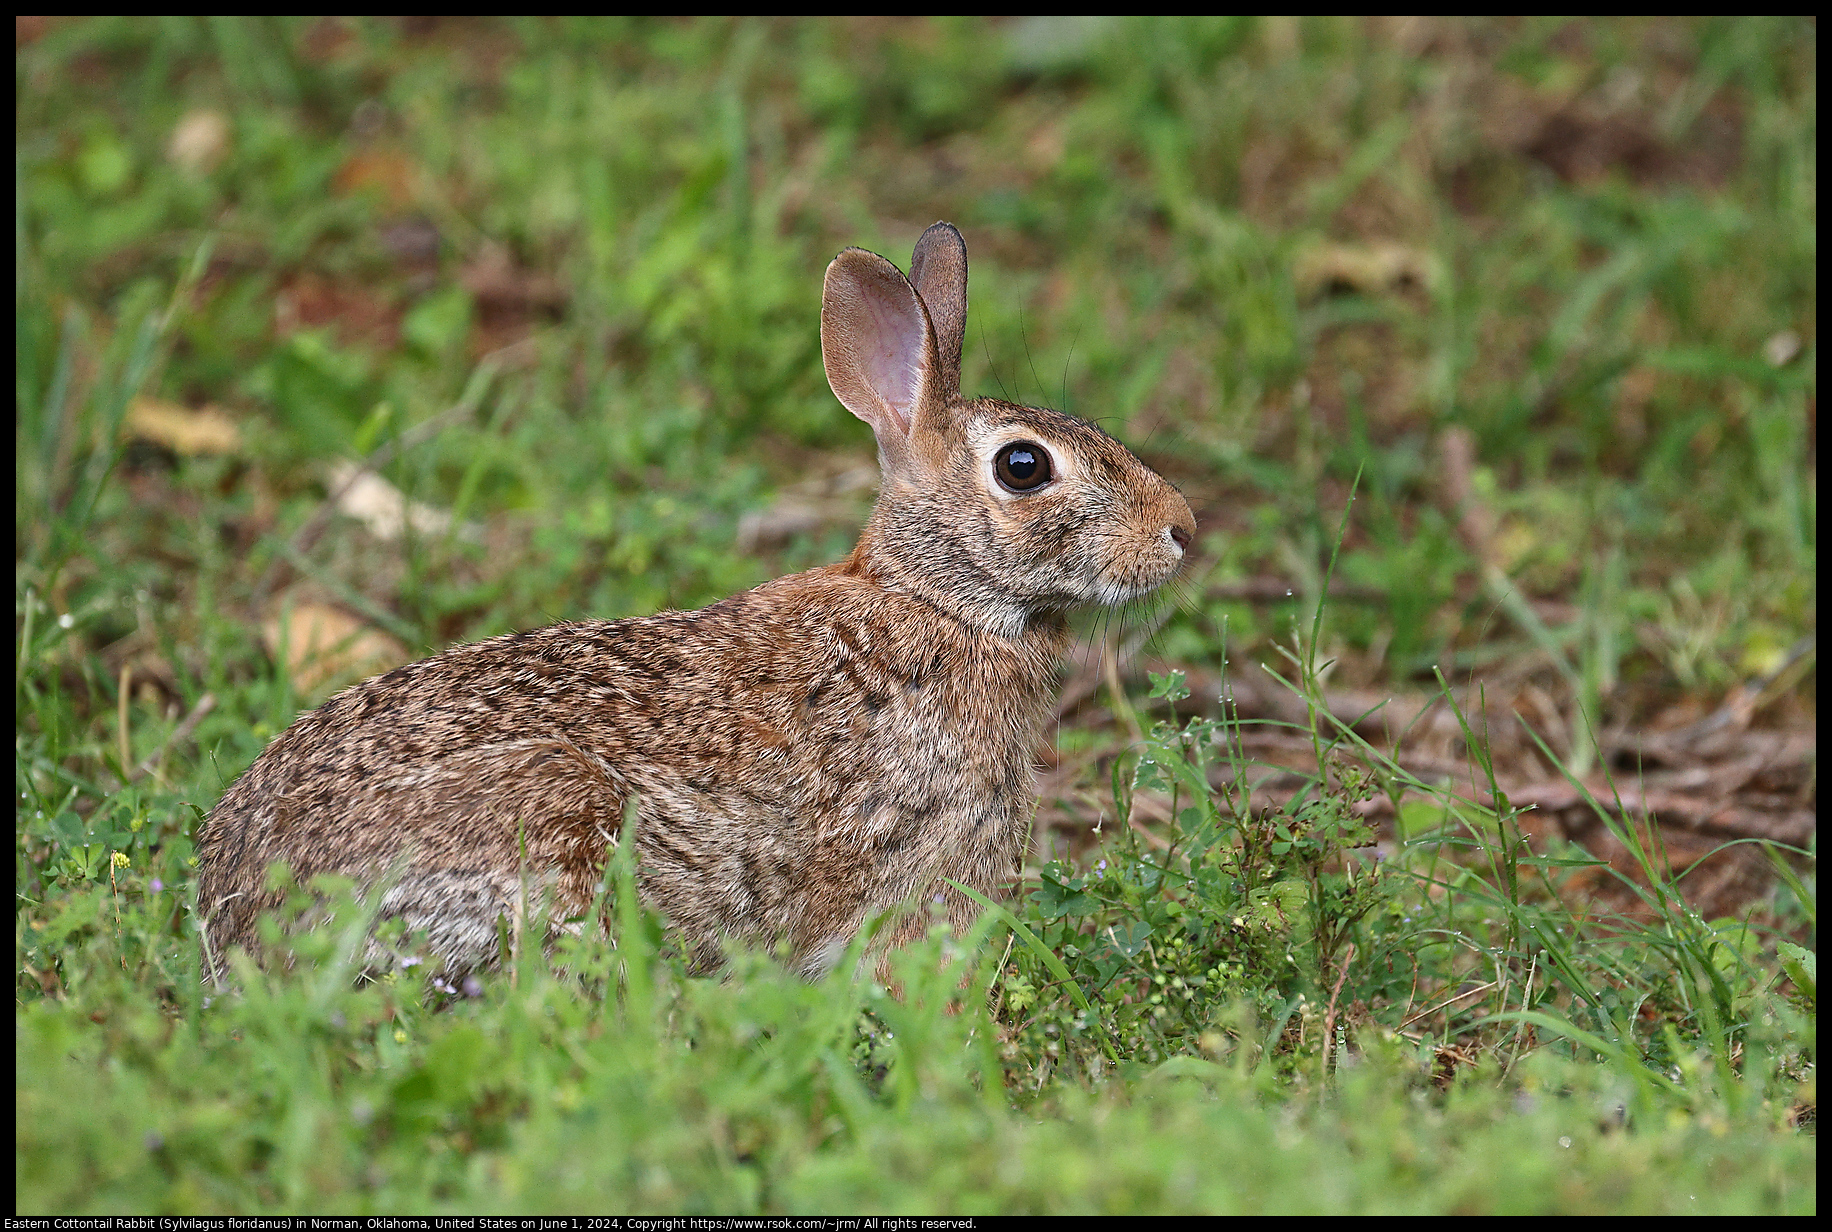 Eastern Cottontail Rabbit (Sylvilagus floridanus) in Norman, Oklahoma, United States on June 1, 2024